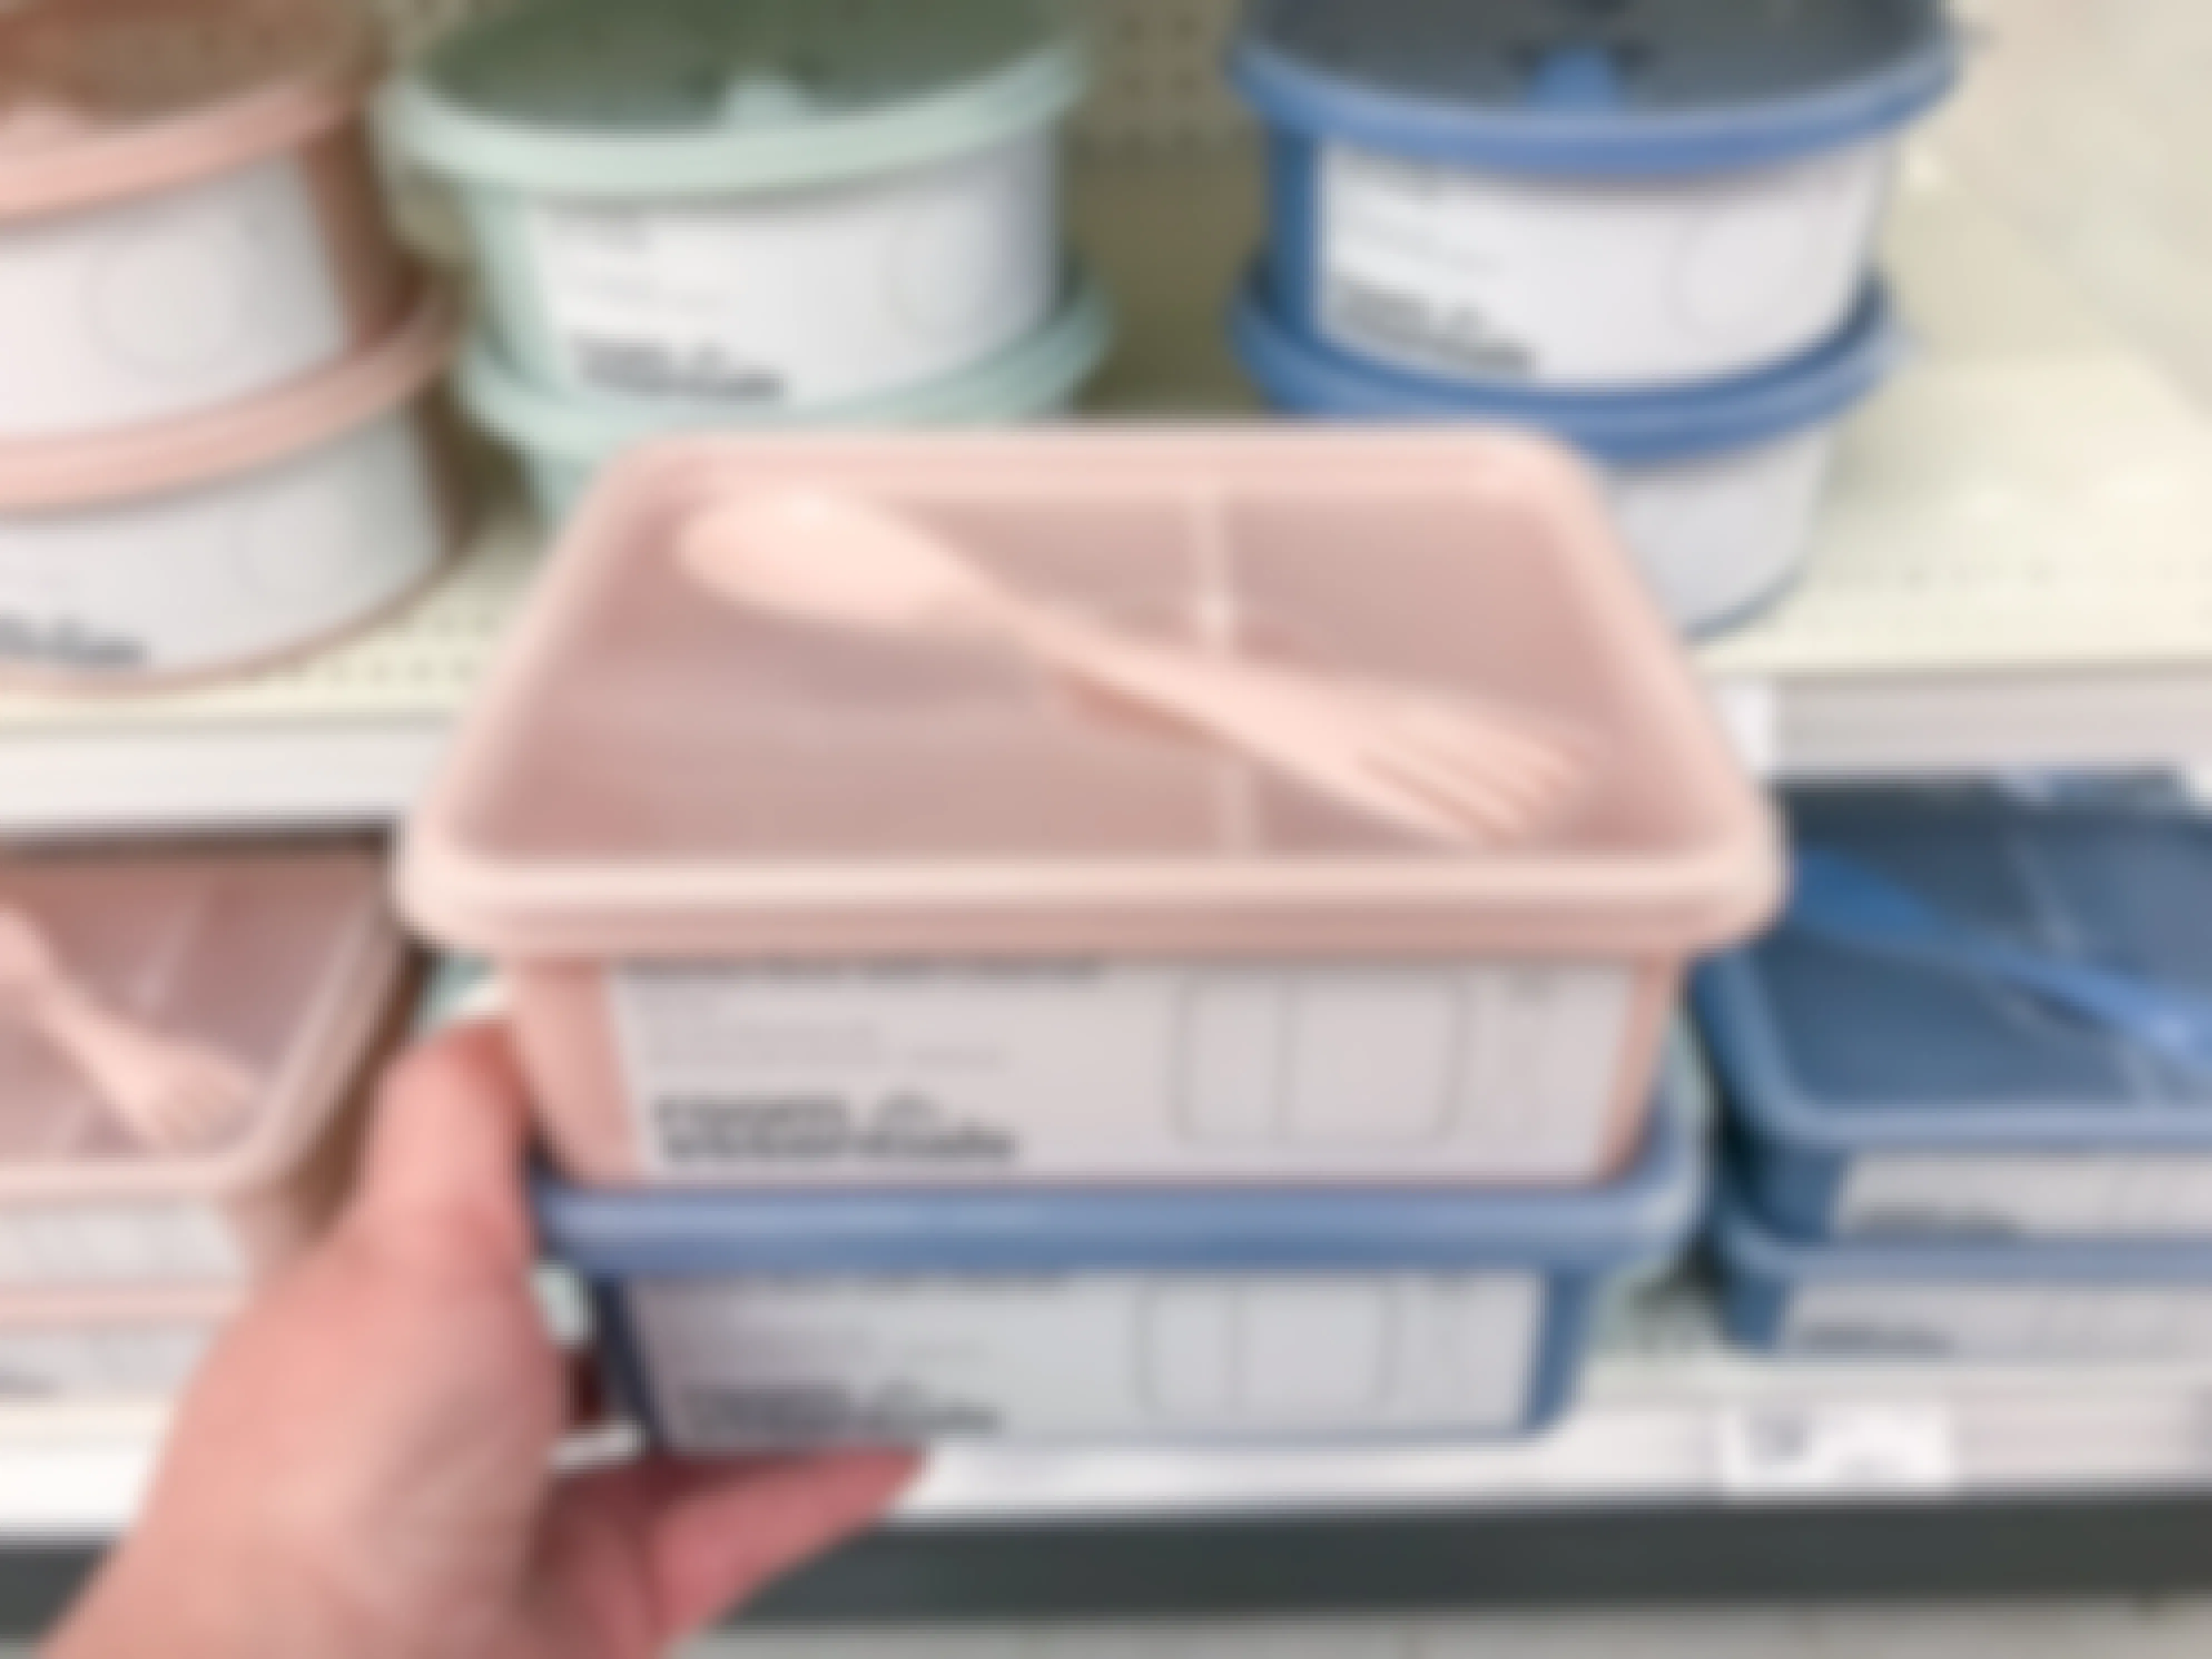 Bento Boxes, Now Available for $3 or Less at Target